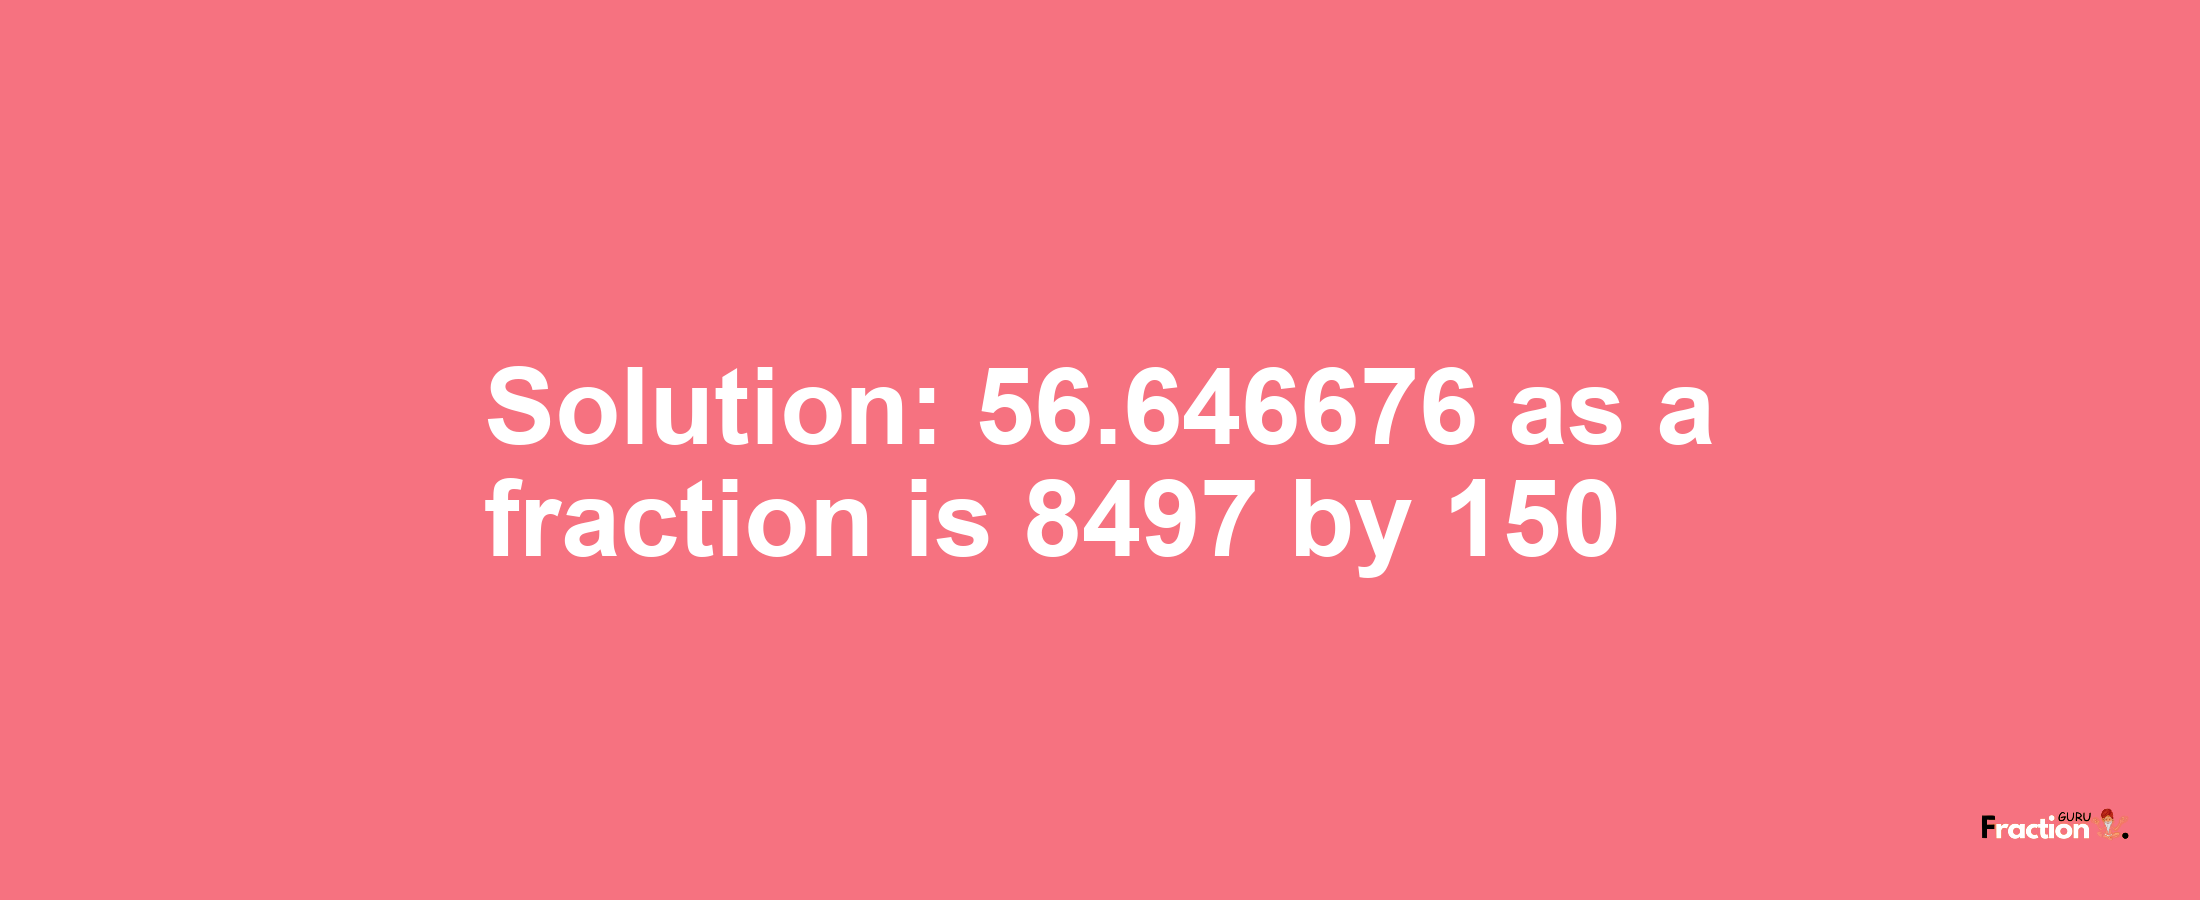 Solution:56.646676 as a fraction is 8497/150